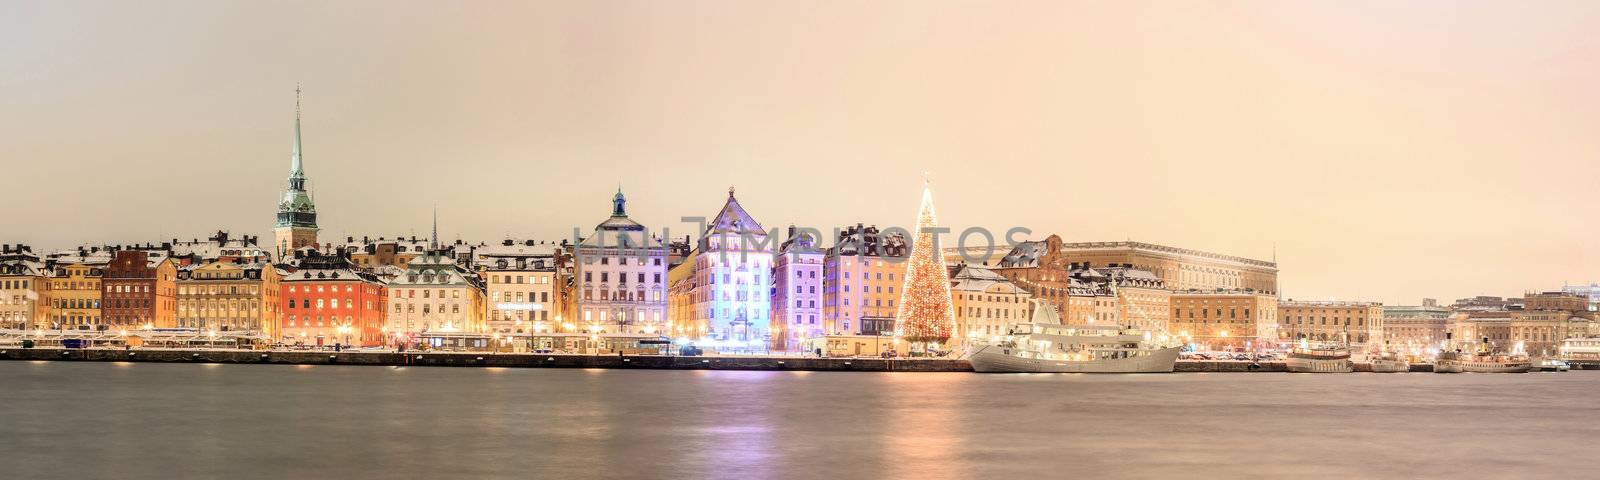 Stockholm Panorama at night by vichie81